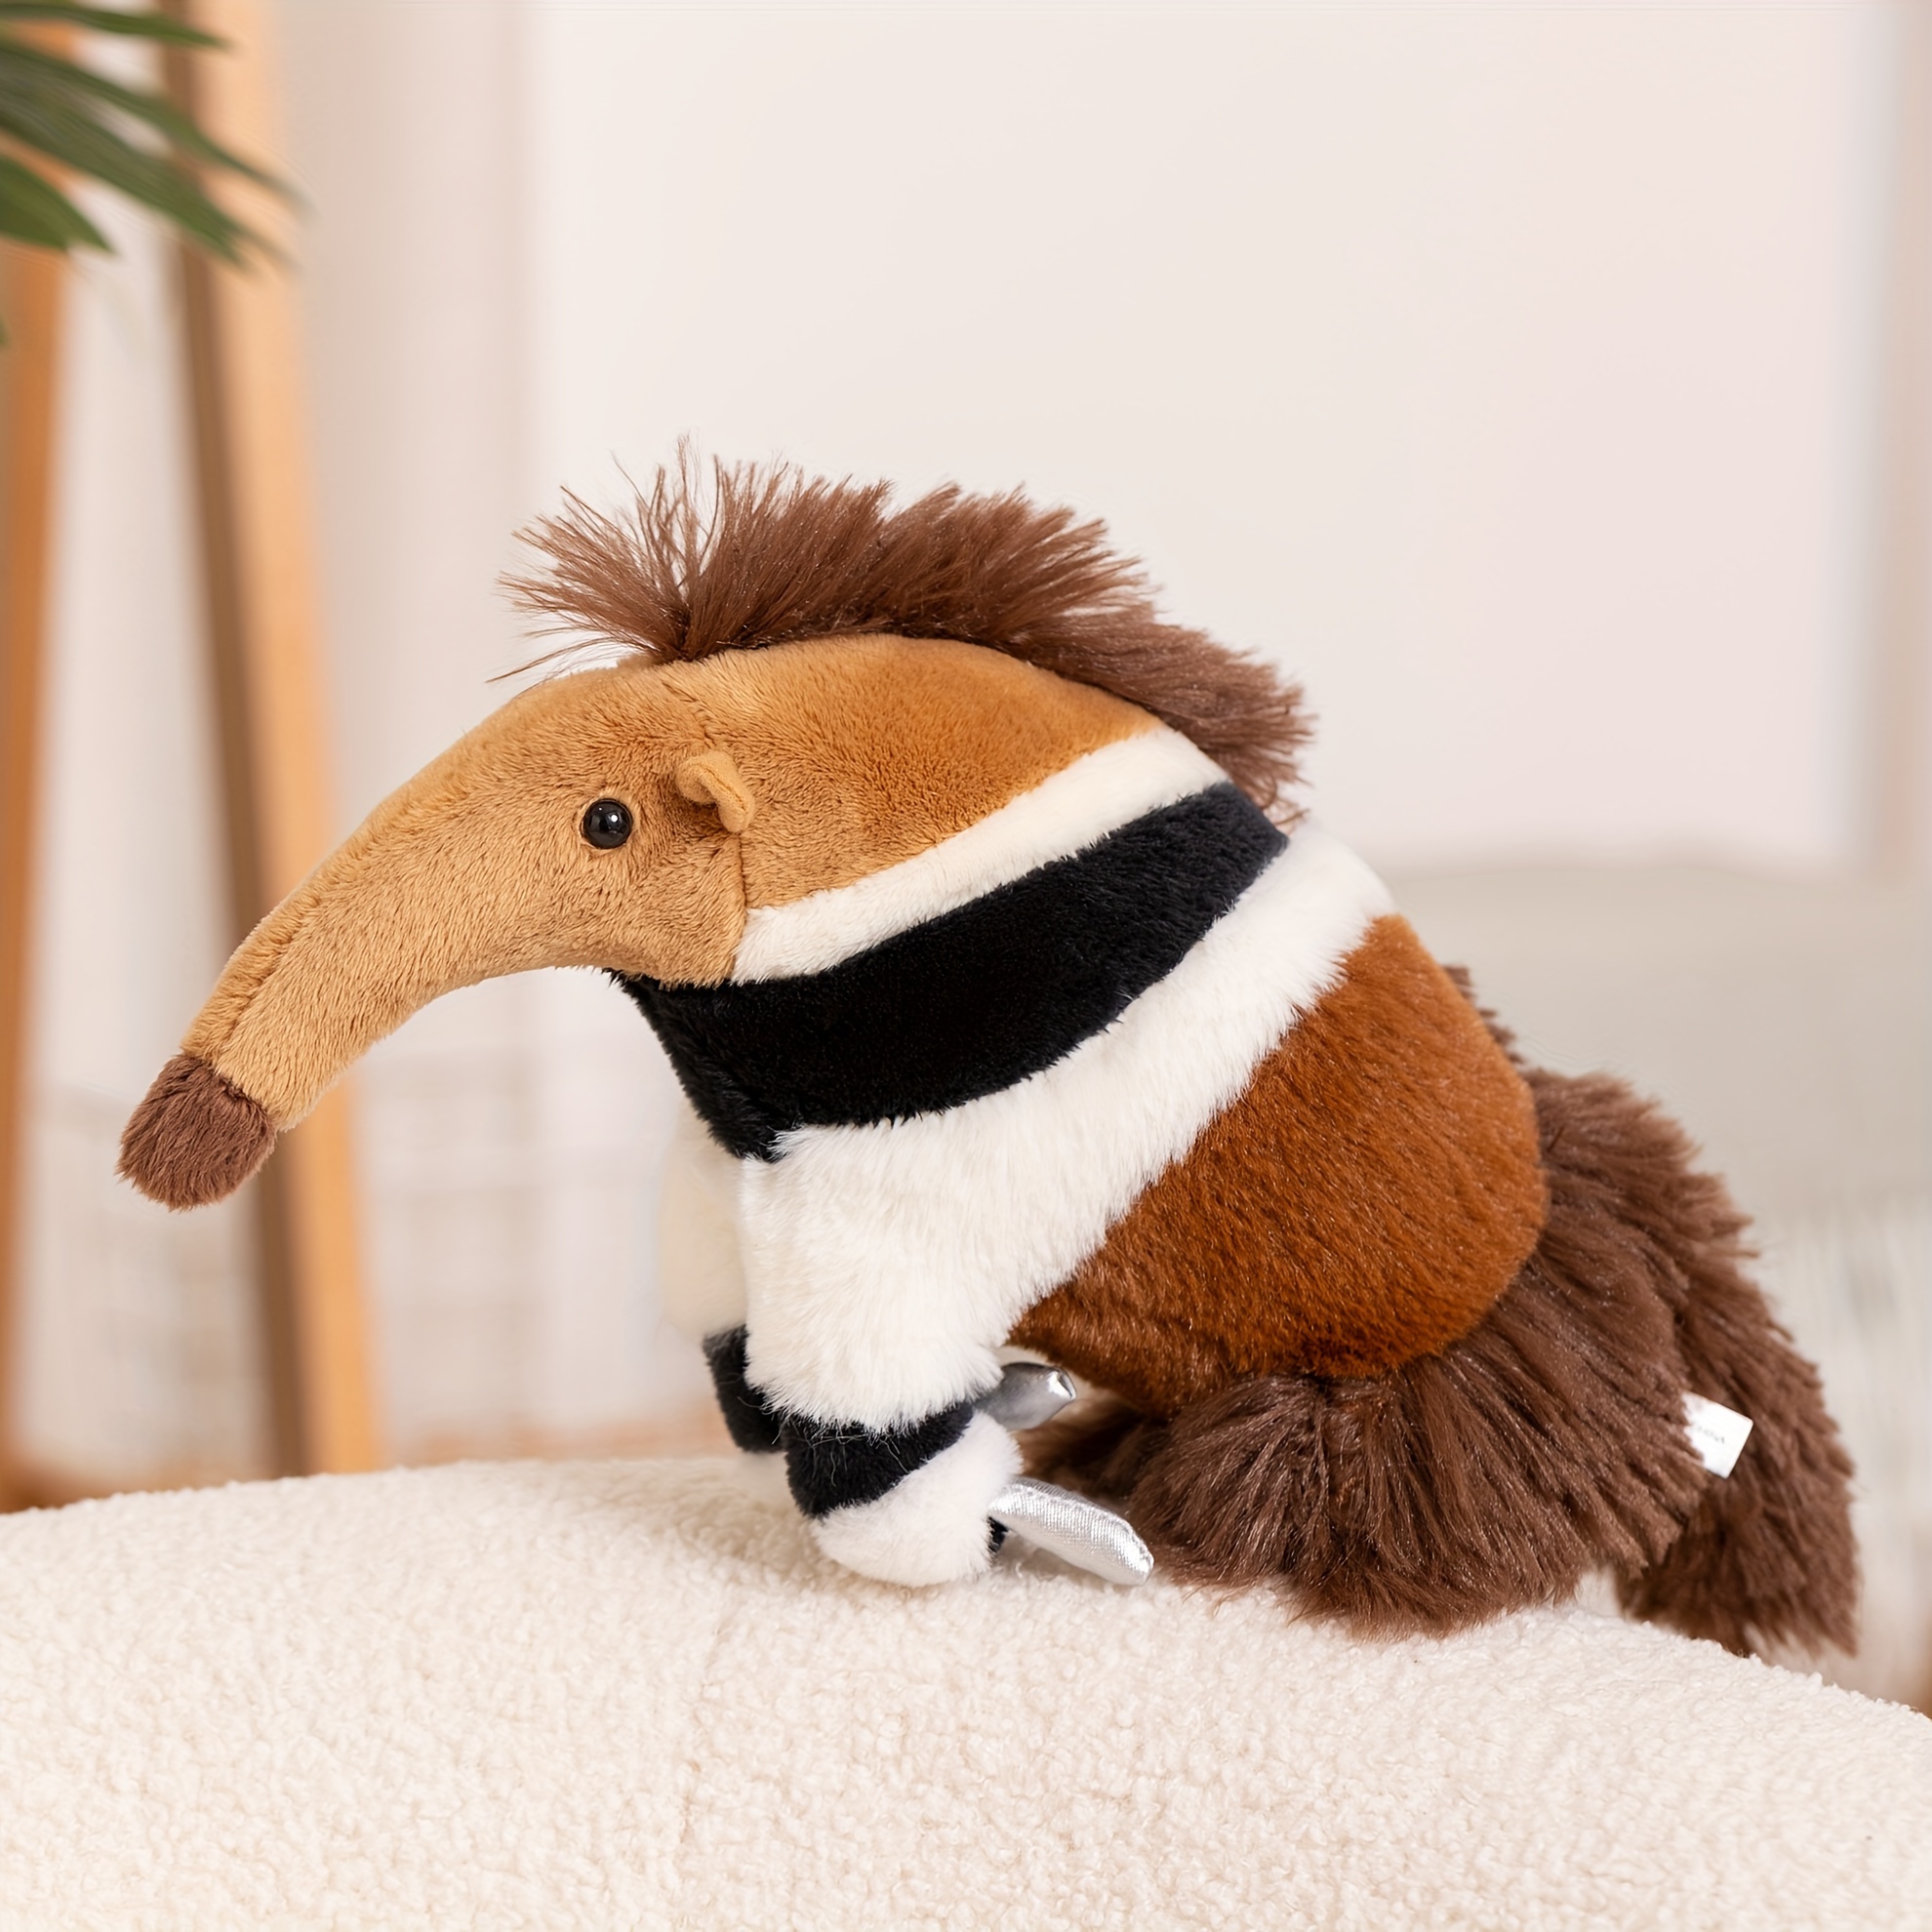 

25cm/9.84in Brown Anteater Simulated Animals Soft Stuffed Plush Doll Furry To Touch Nice Ornament Gifts Home Decor Party Decor Cute Doll Plush To Decorate Your Perfect Home